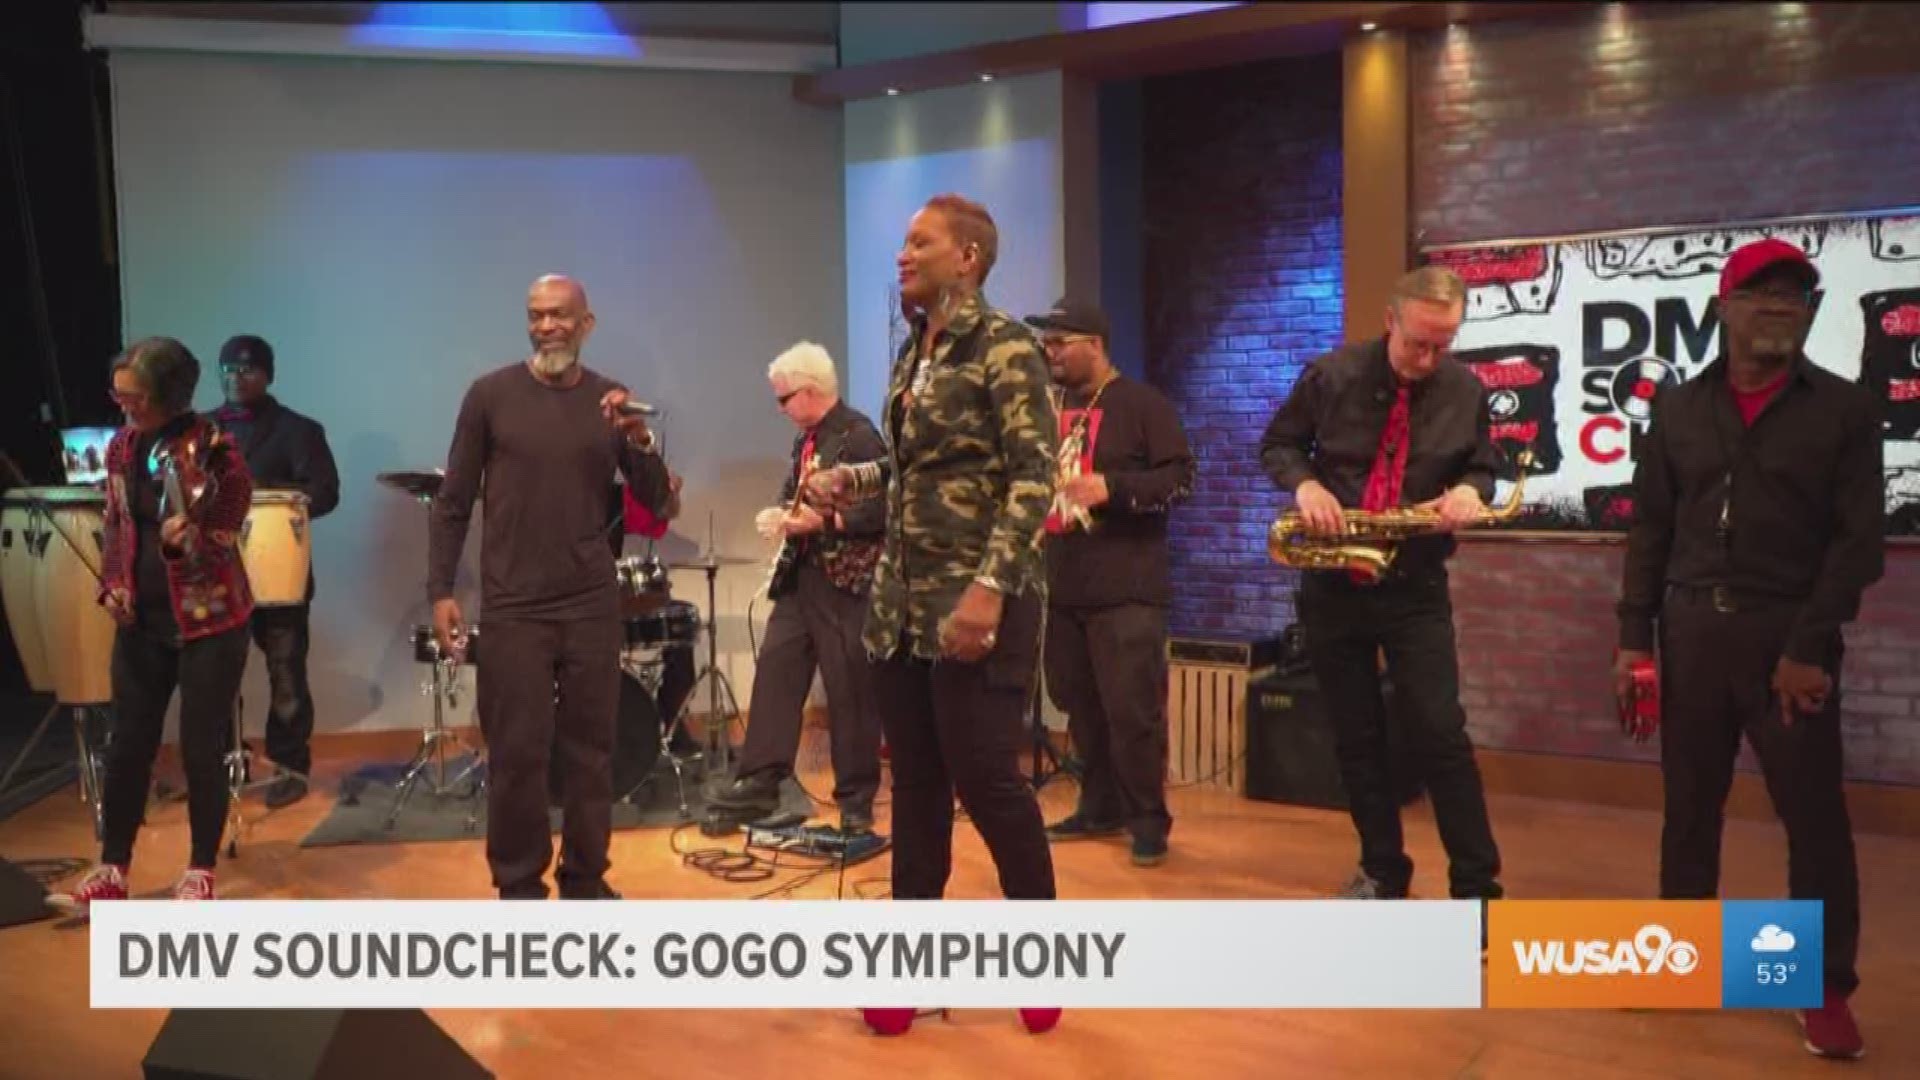 Fight the Power!! The GoGo Symphony performed their version of the classic song on the DMV Soundcheck! Manager of GoGo Symphony Bo Sampson speaks about the origin of their music.